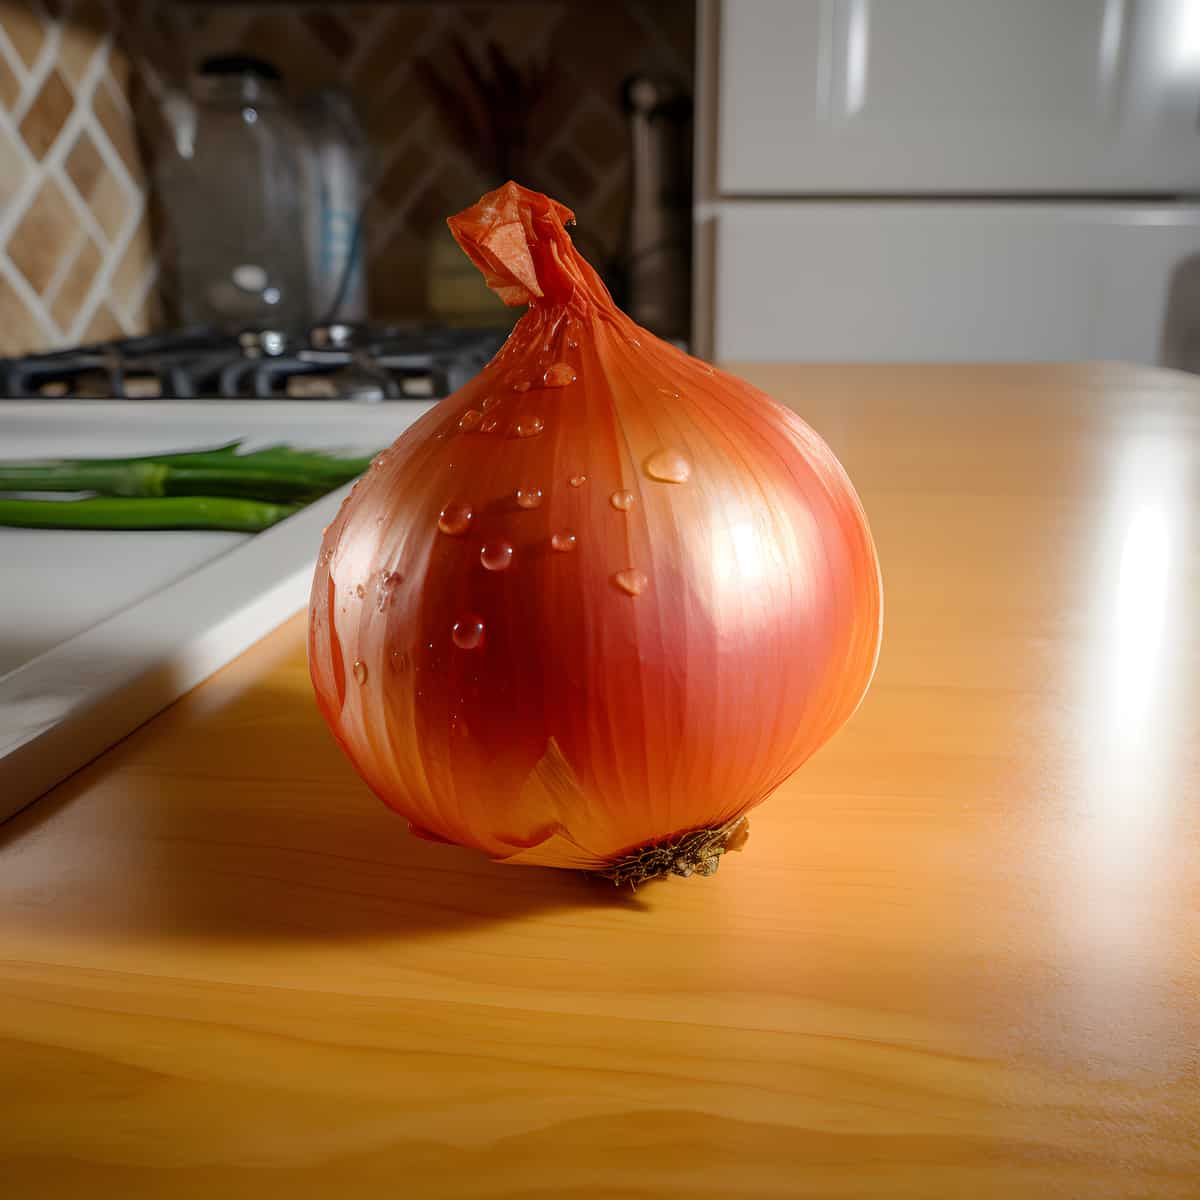 Onion on a kitchen counter